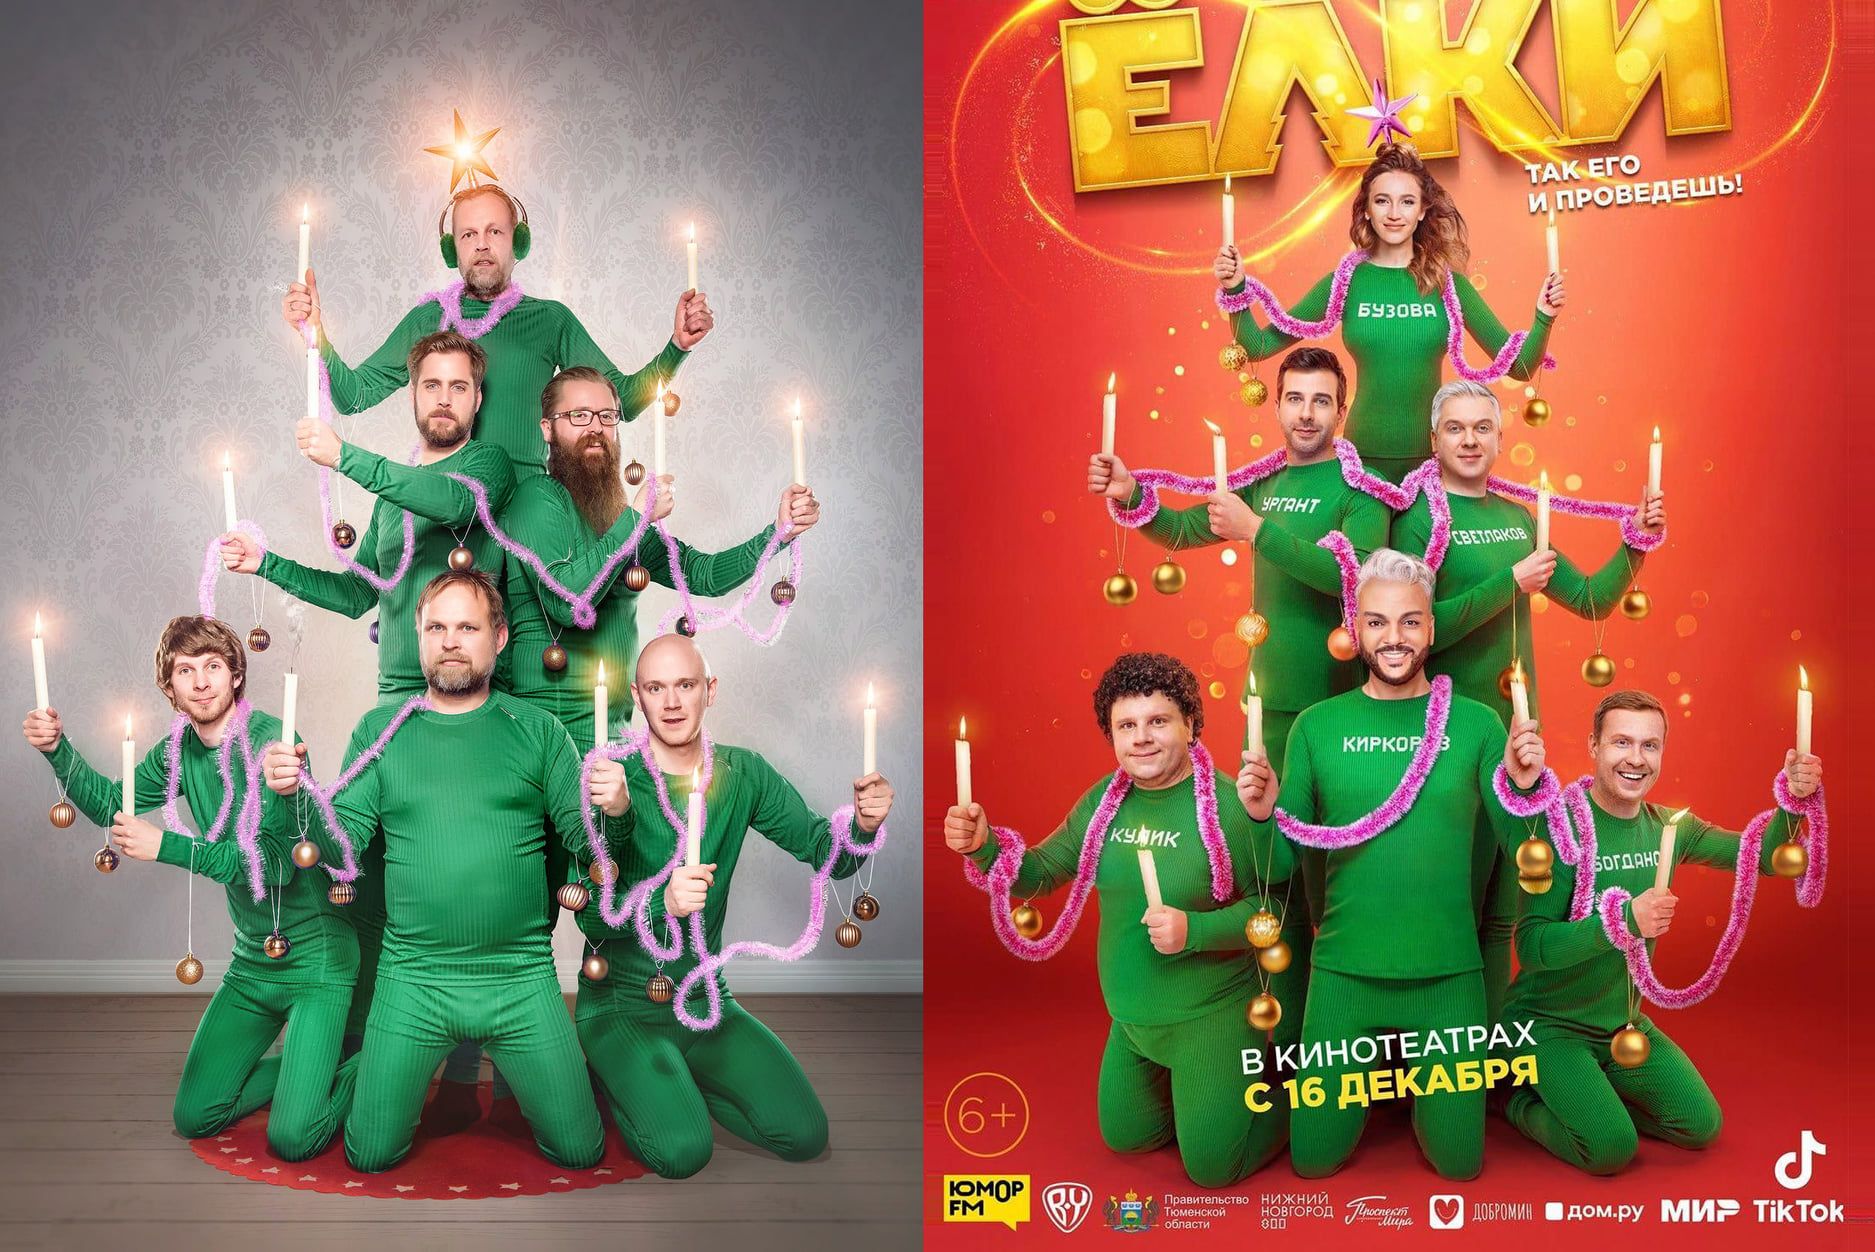 A russian movie stole our Christmas card